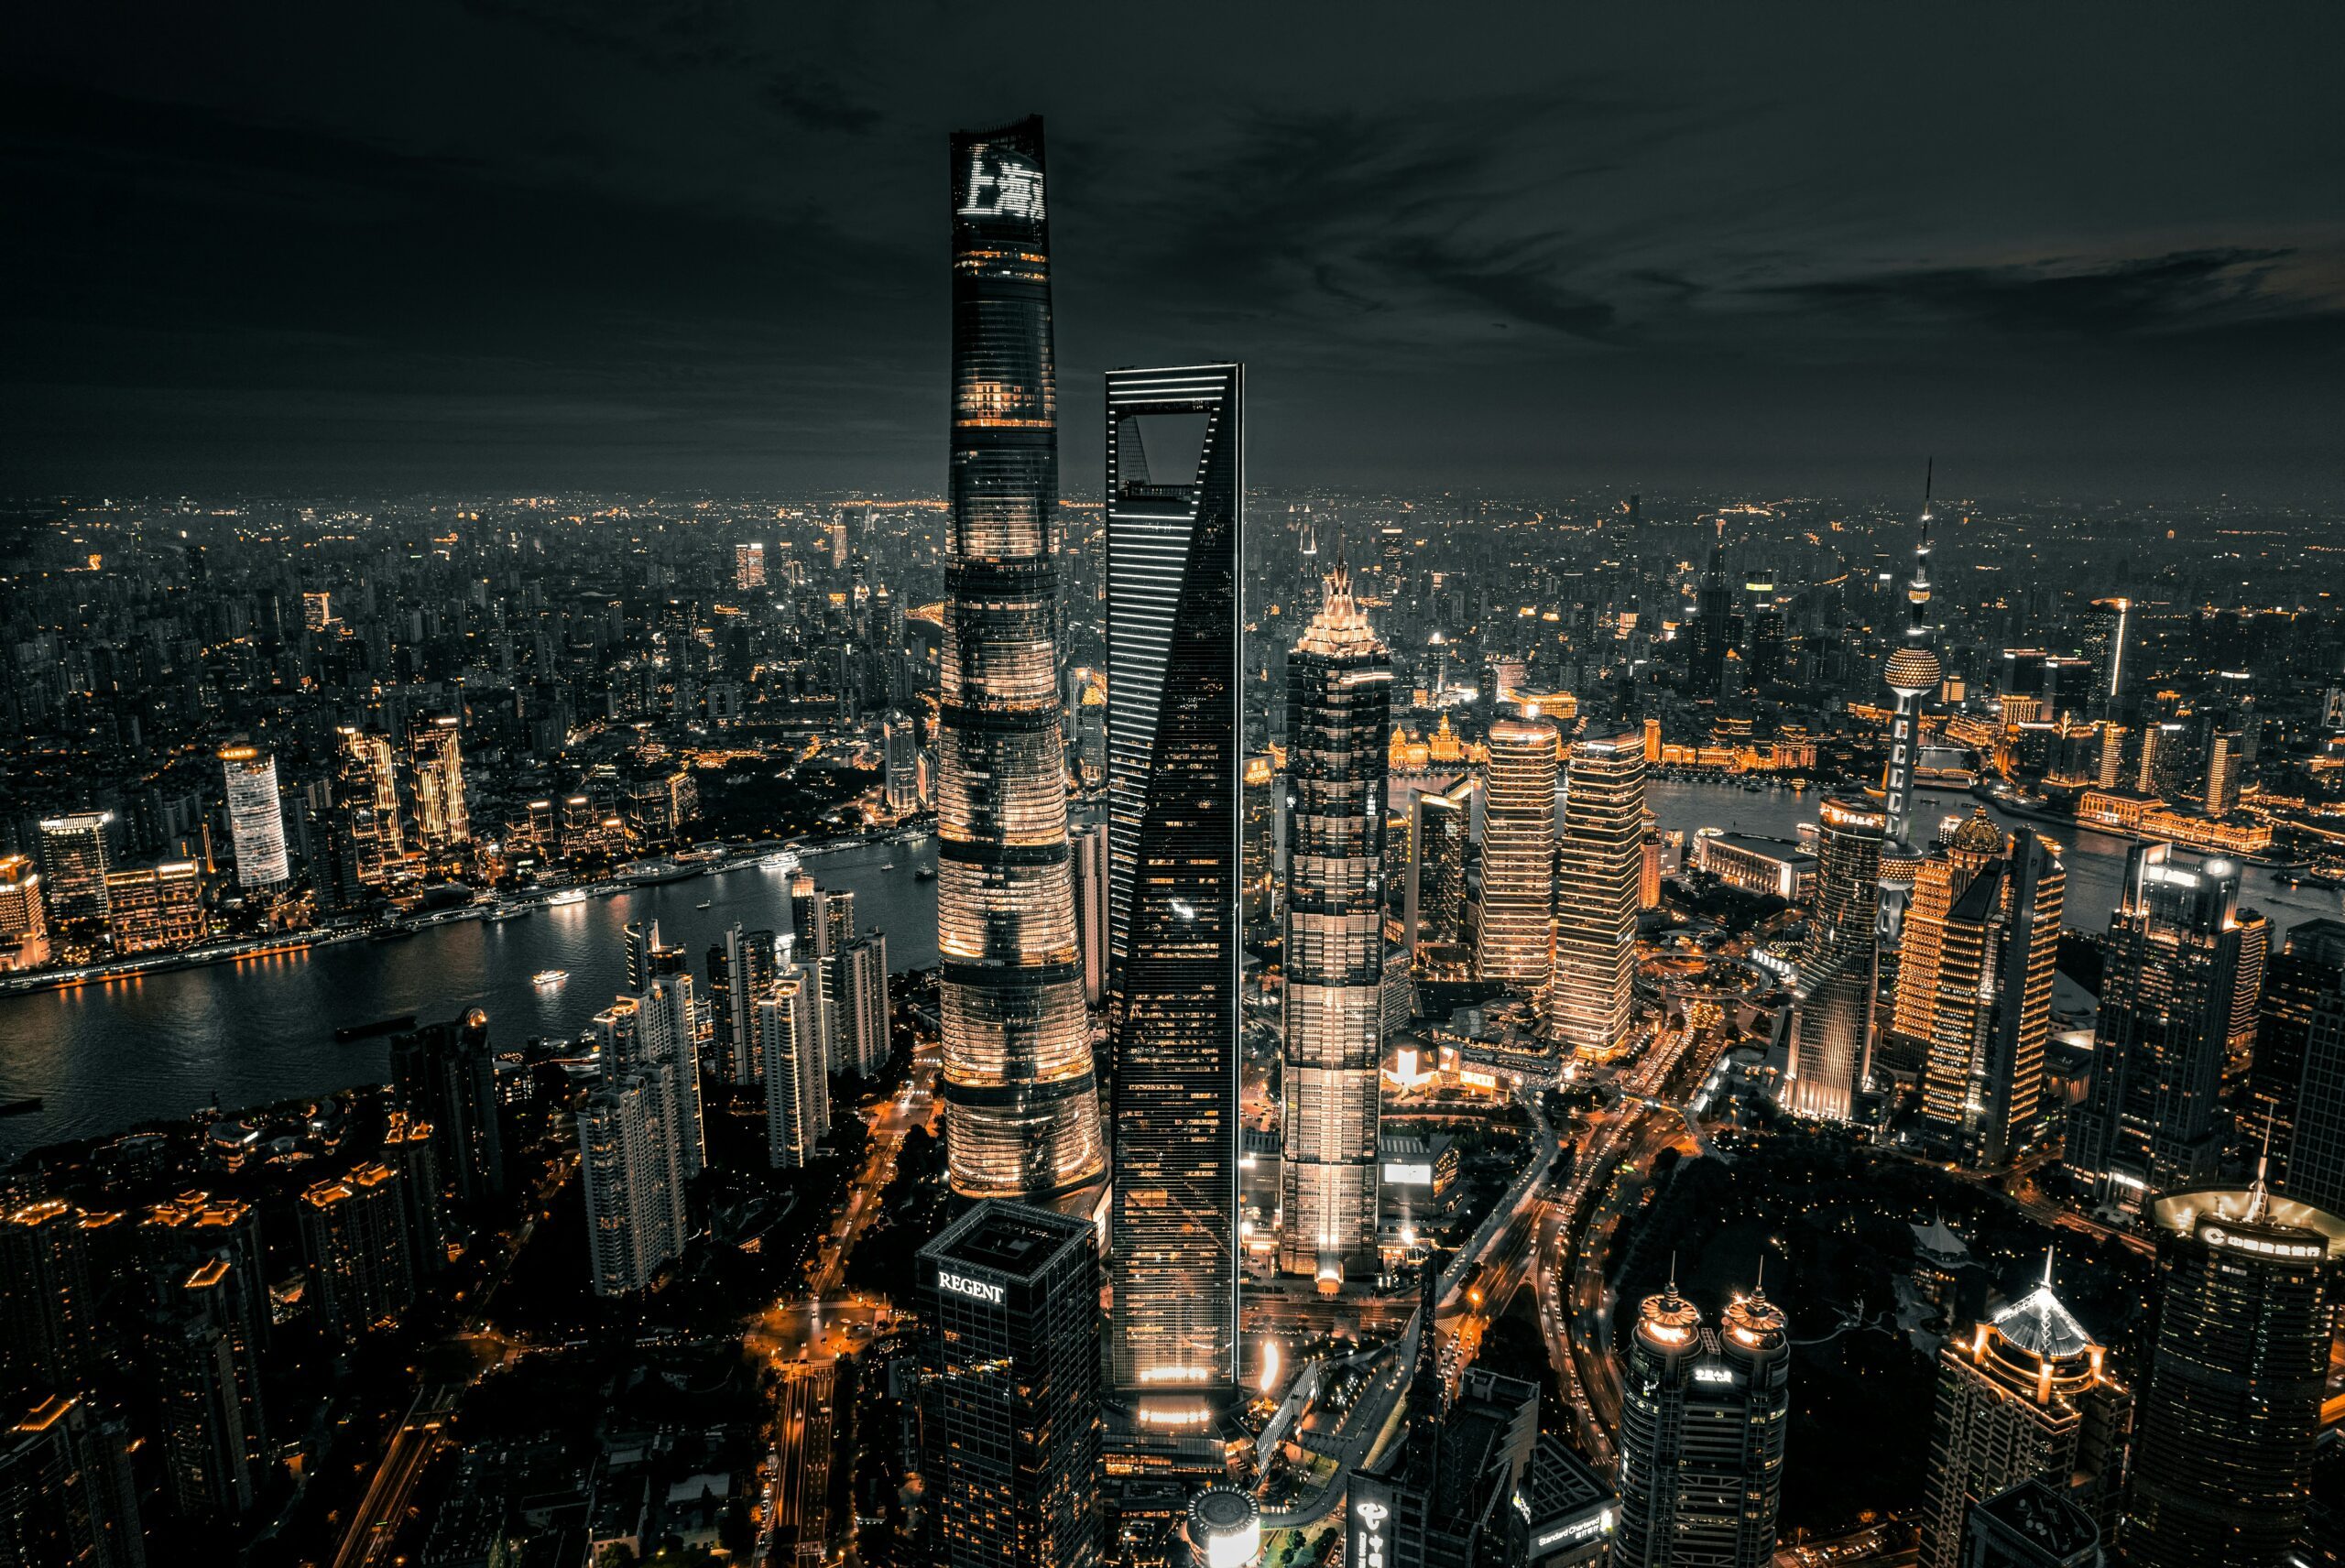 Shanghai presses ahead into secondary market with new 10b yuan fund